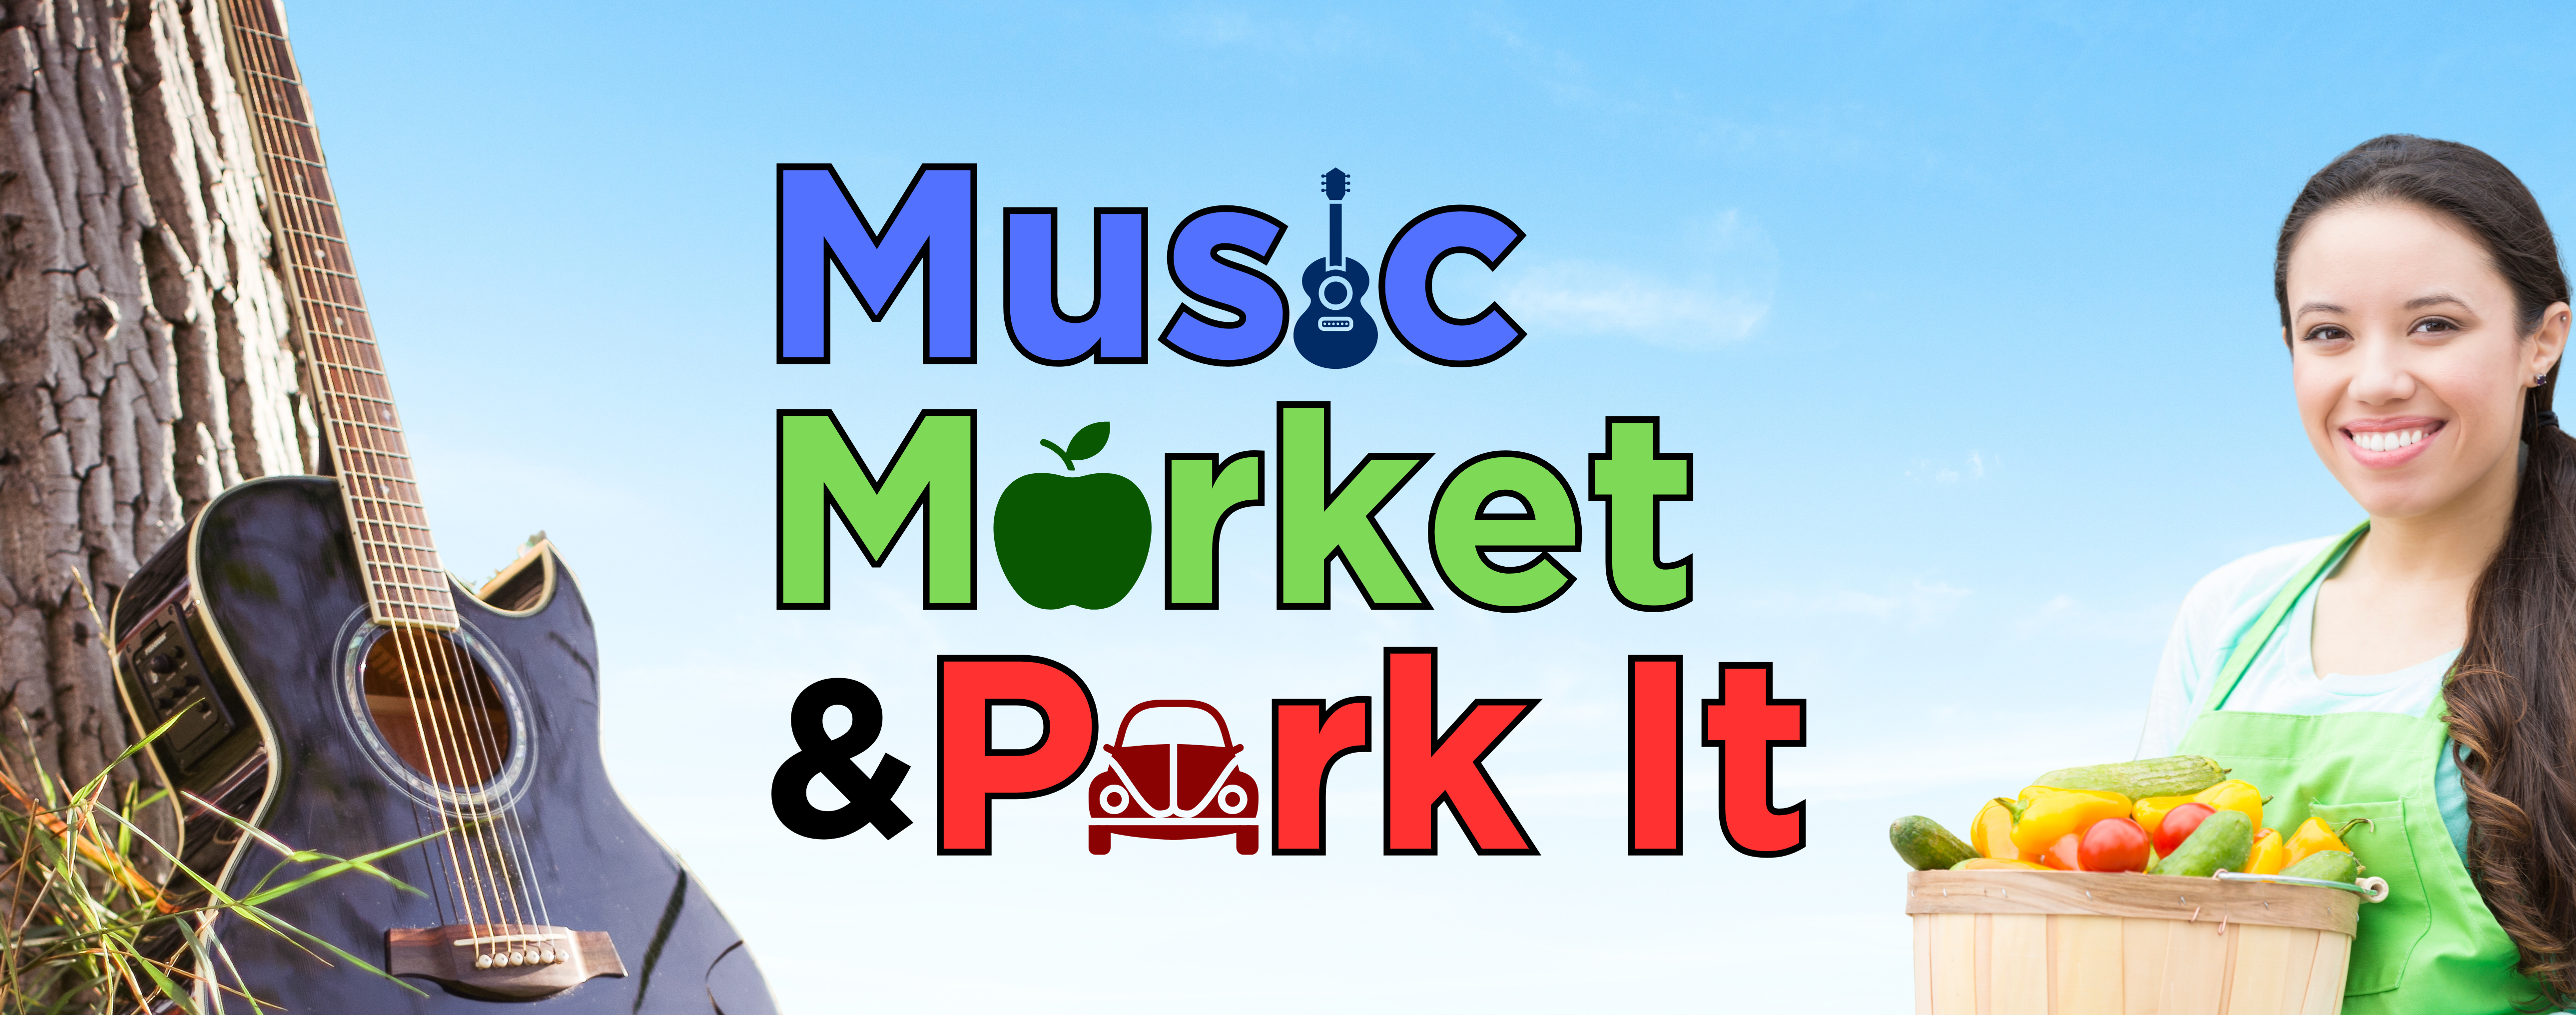 Photos of black acoustic guitar leaning on tree and woman holding basket of vegetables with text that says Music Market & Park It